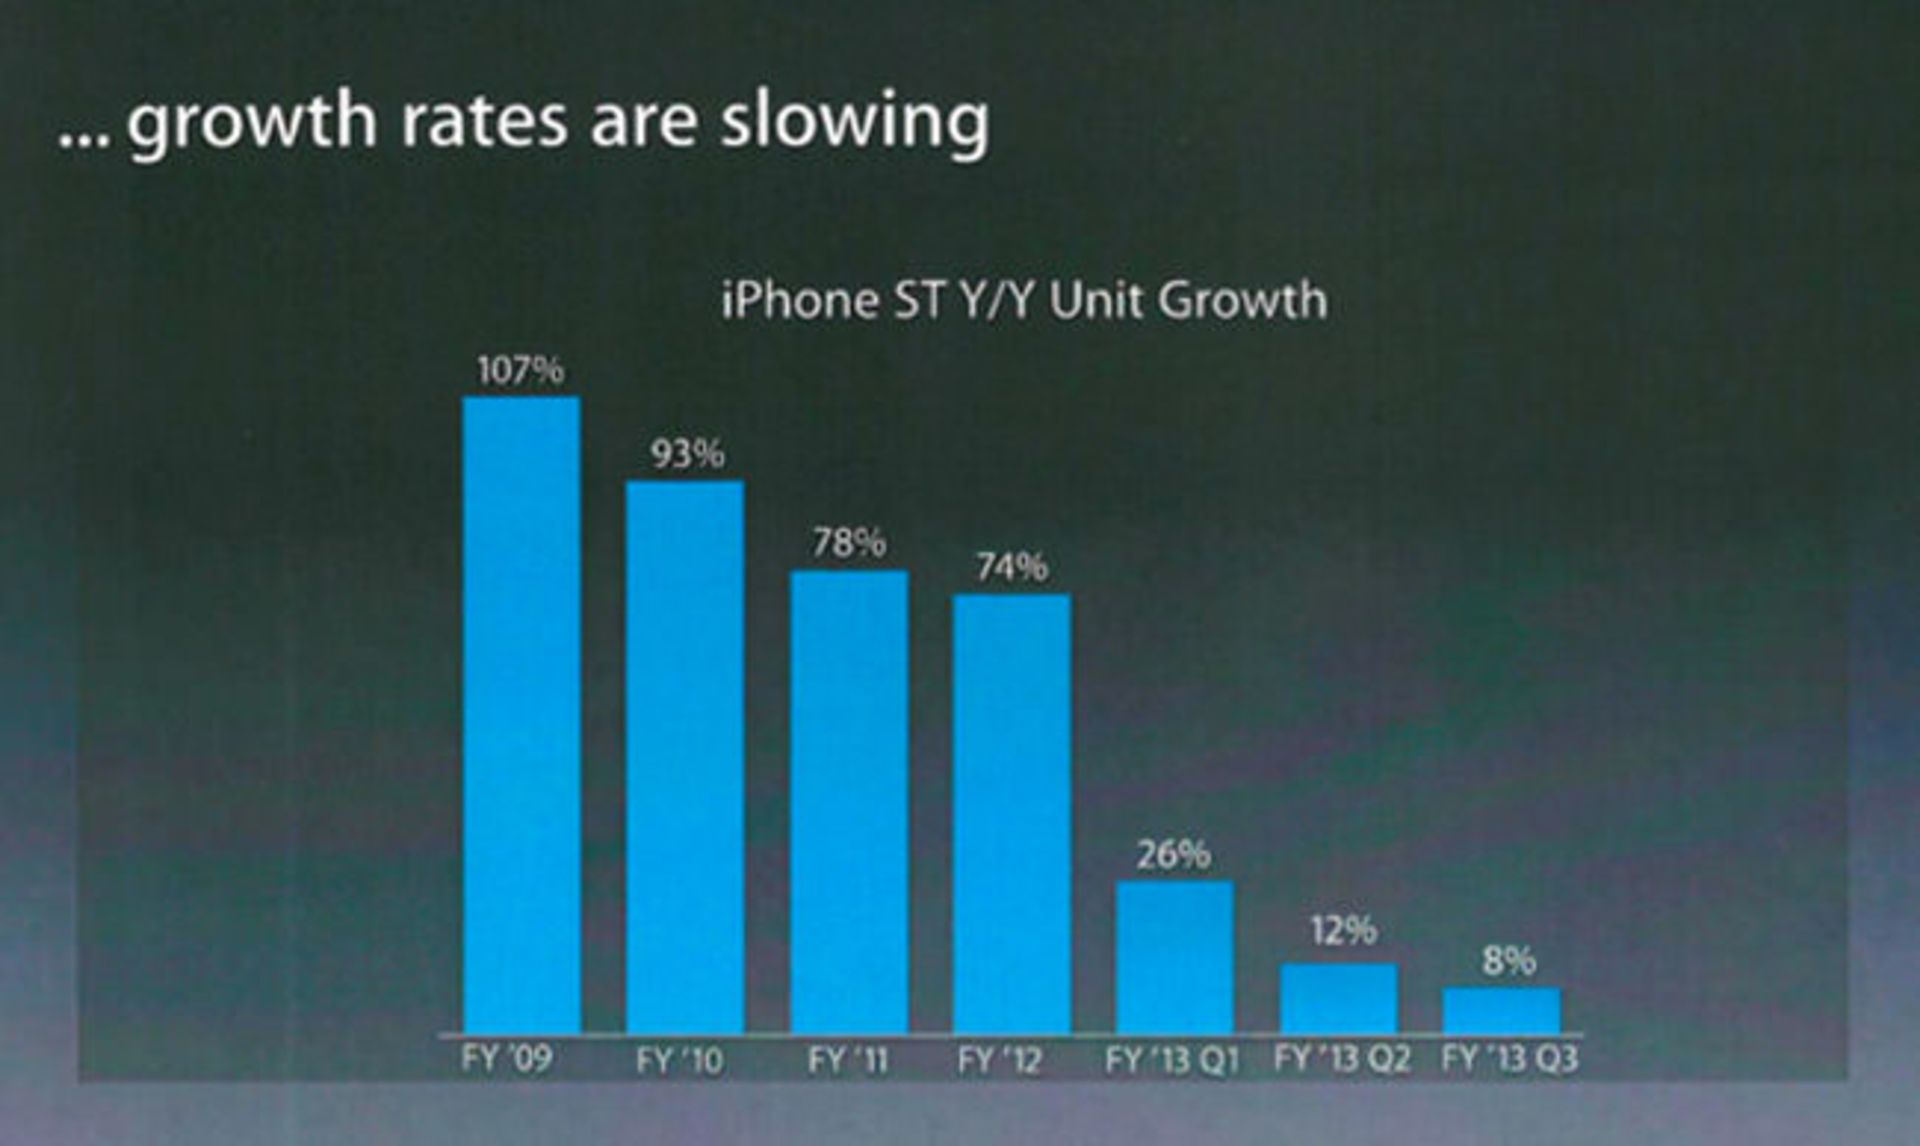 iPhoneGrowth